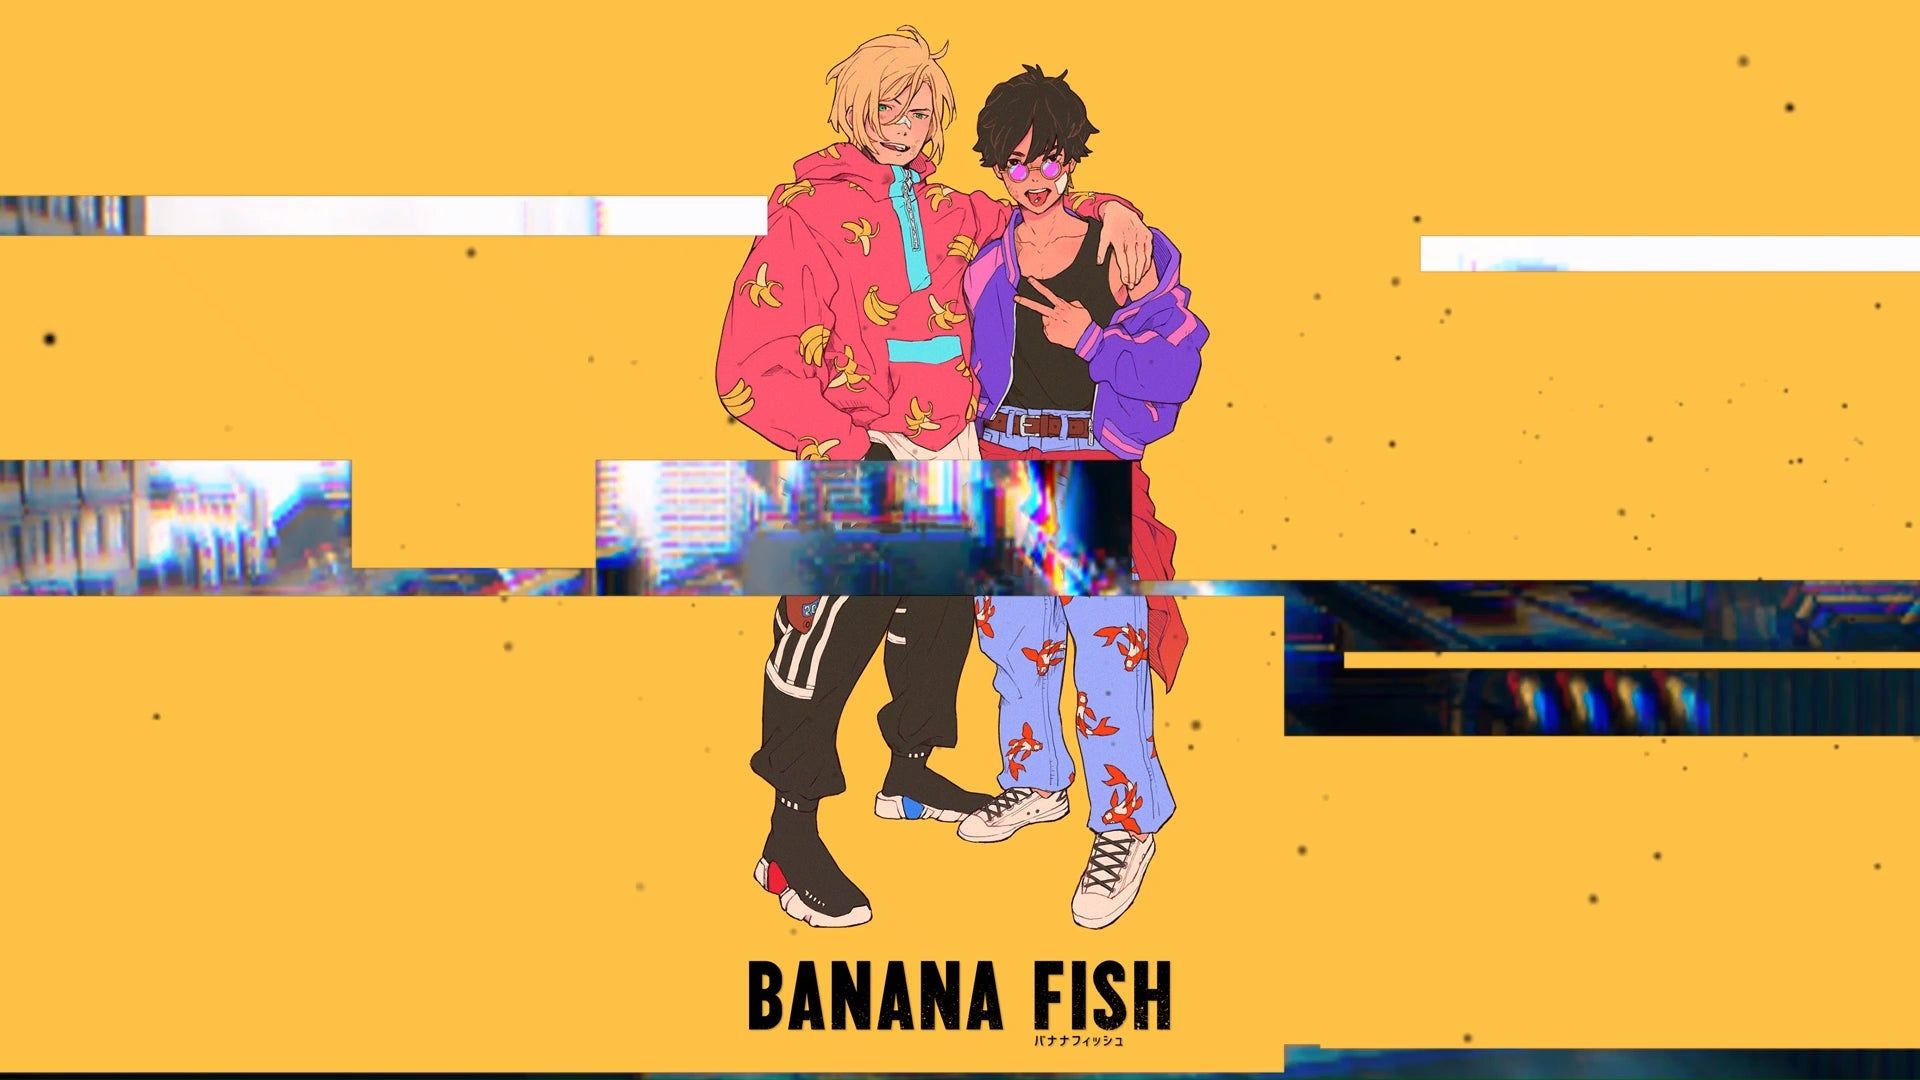 IDK if i should post this here but here it is. a Soft Banana Fish wallpaper